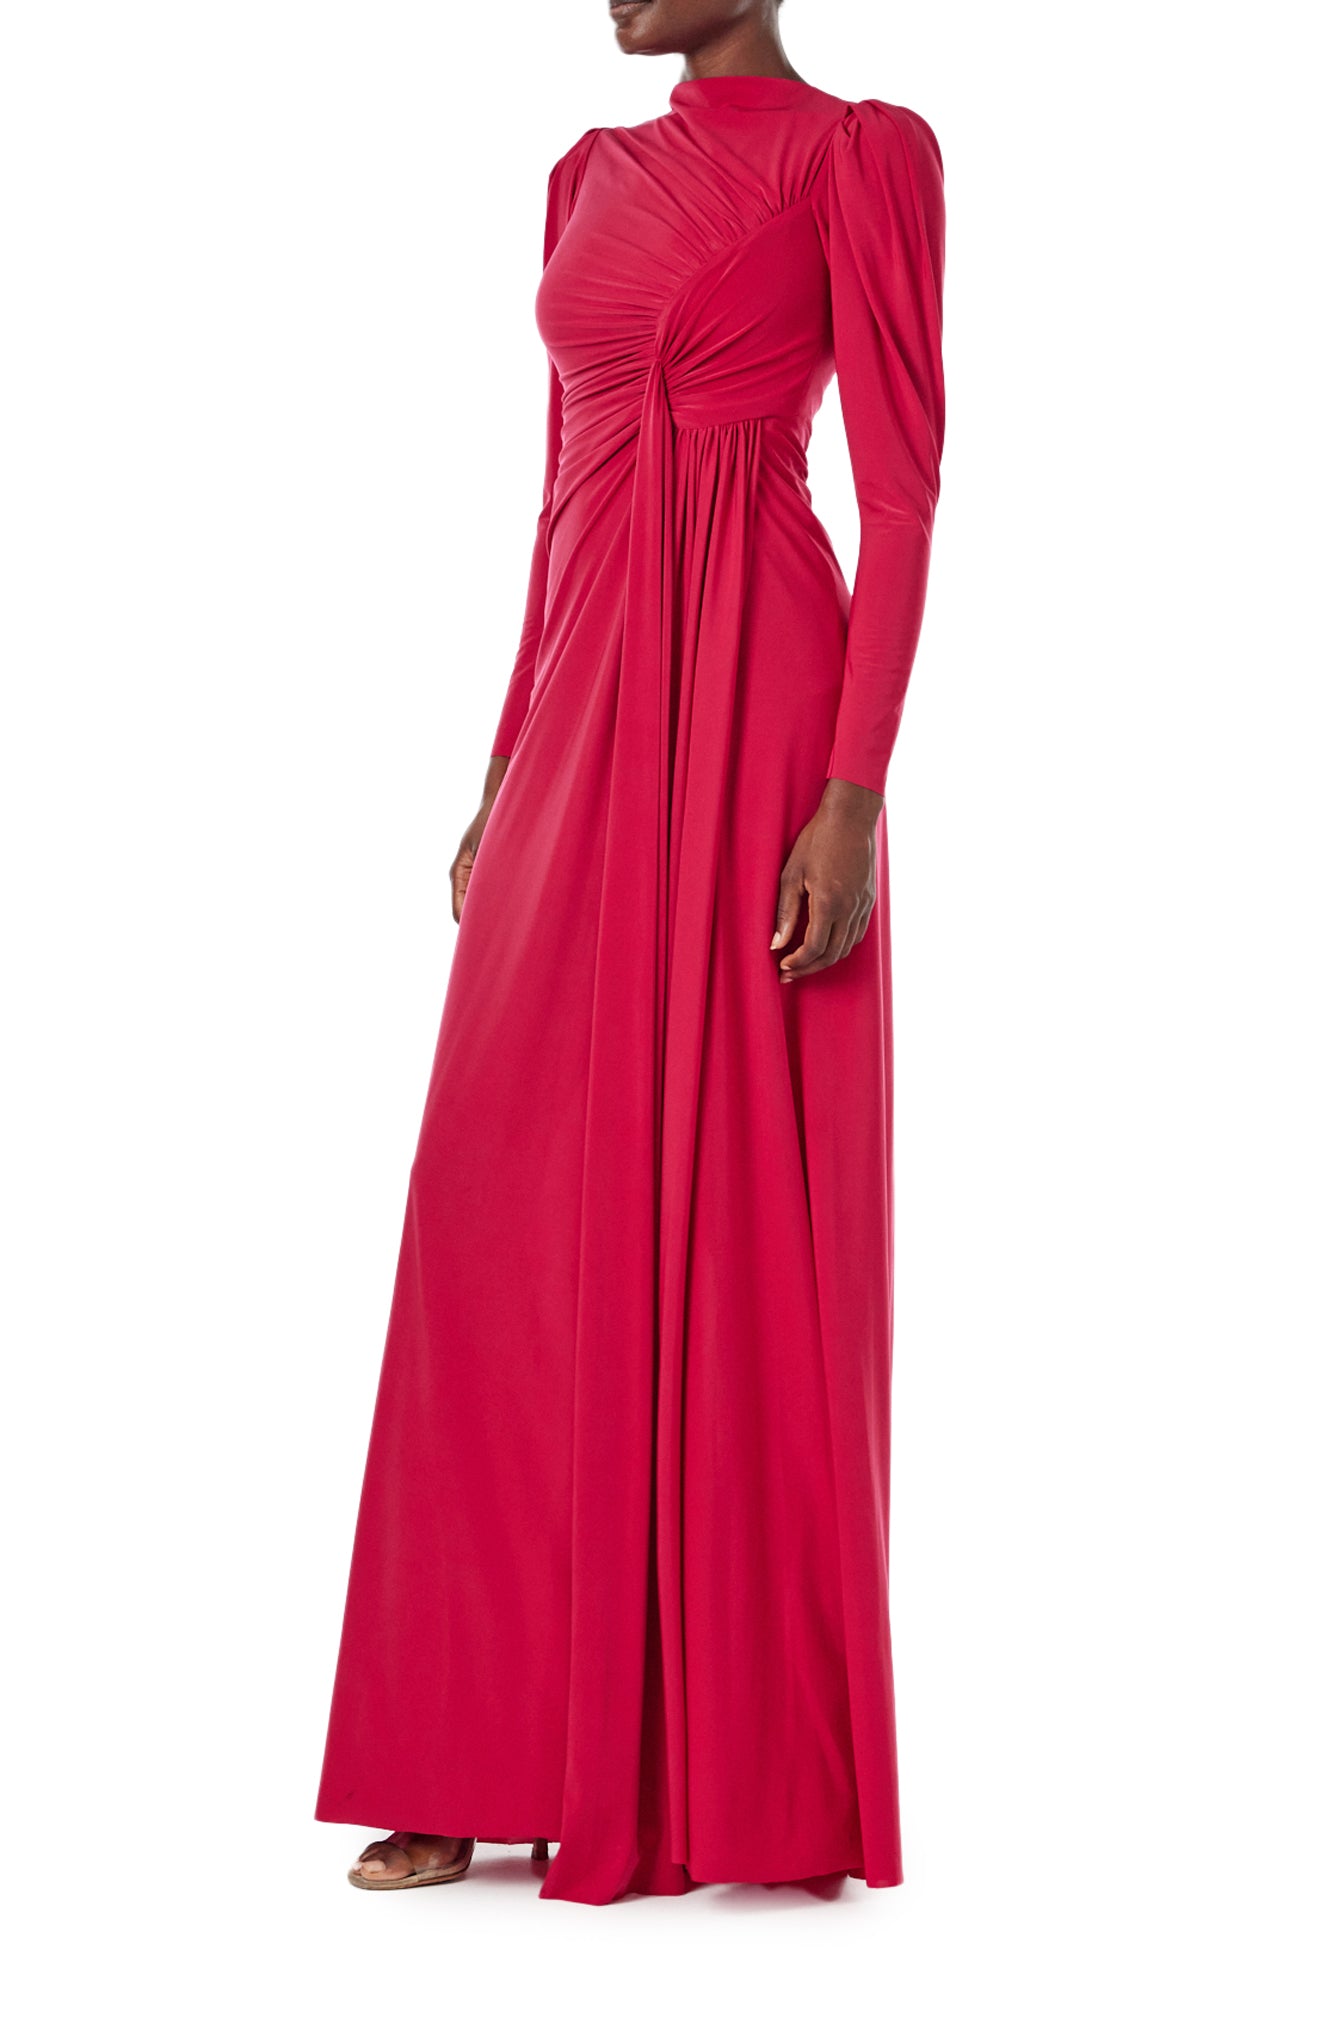 Monique Lhuillier Spring 2024 scarlet red matte jersey long sleeve, gown with draped bodice, jewel neckline and high front skirt slit - left side.